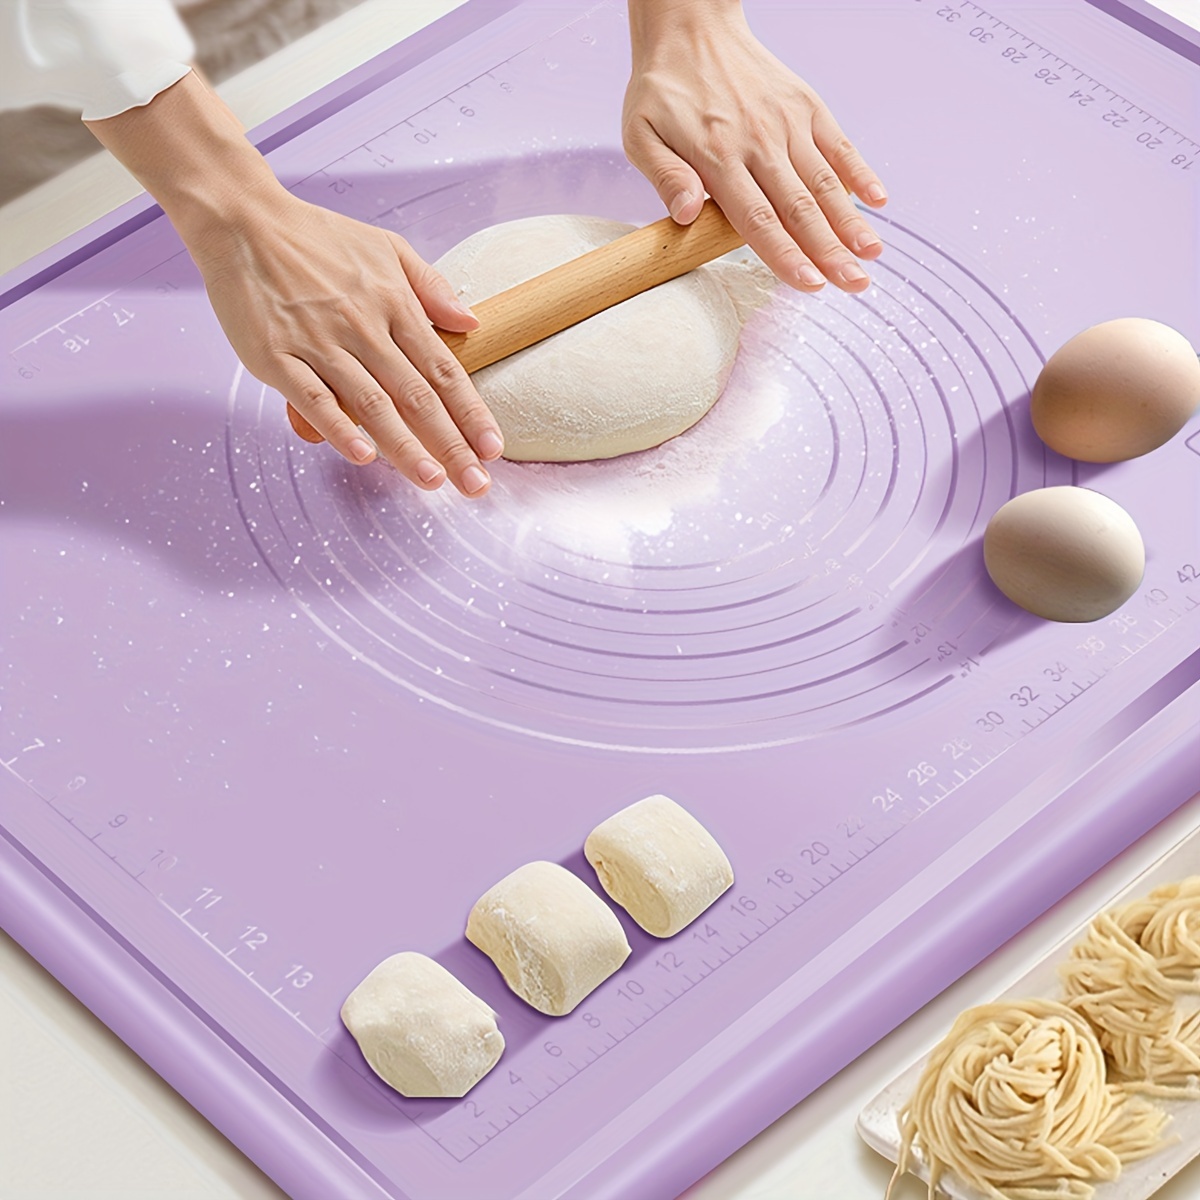 

Silicone Baking Mat - Thick Food Grade Silicone Pastry Mat For Rolling Dough, Nonstick Kneading Board For Baking, Dough Rolling And Pastry Mat For Dumplings And .